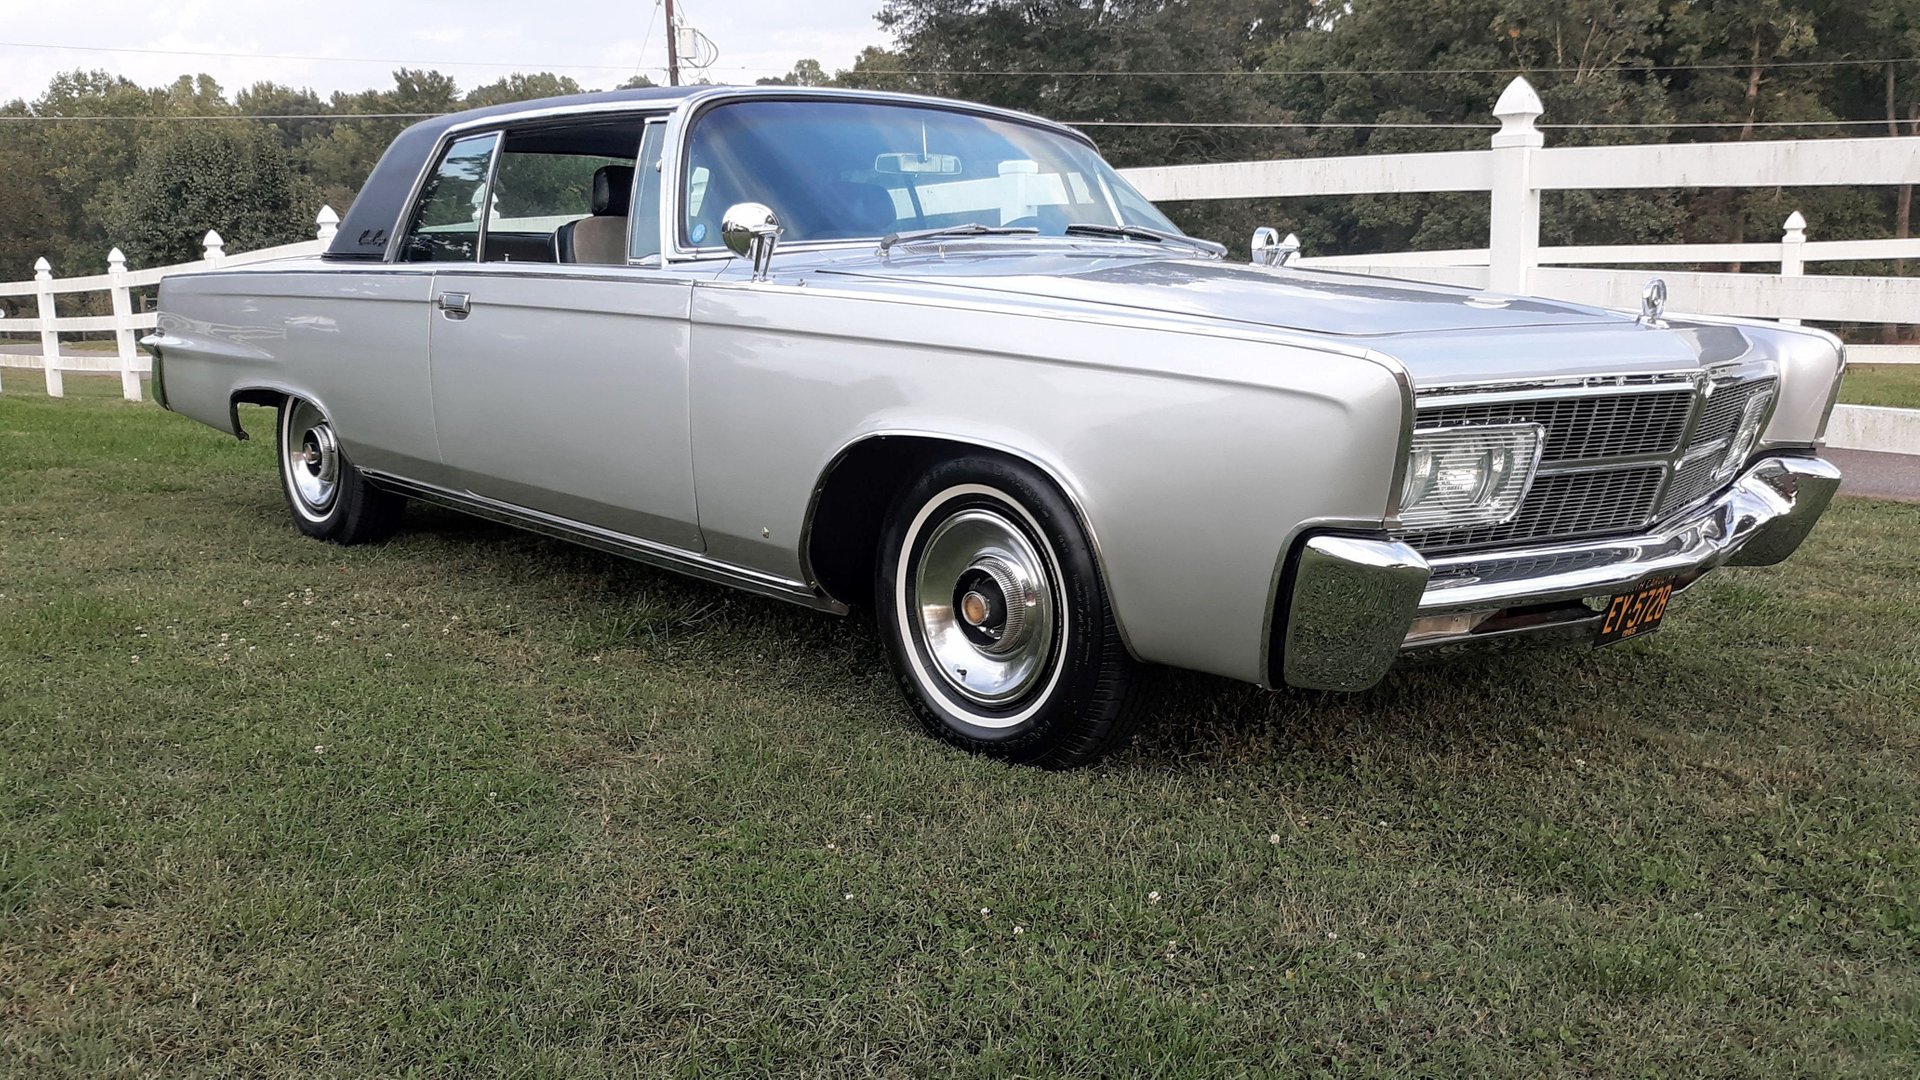 1965 chrysler imperial crown coupe